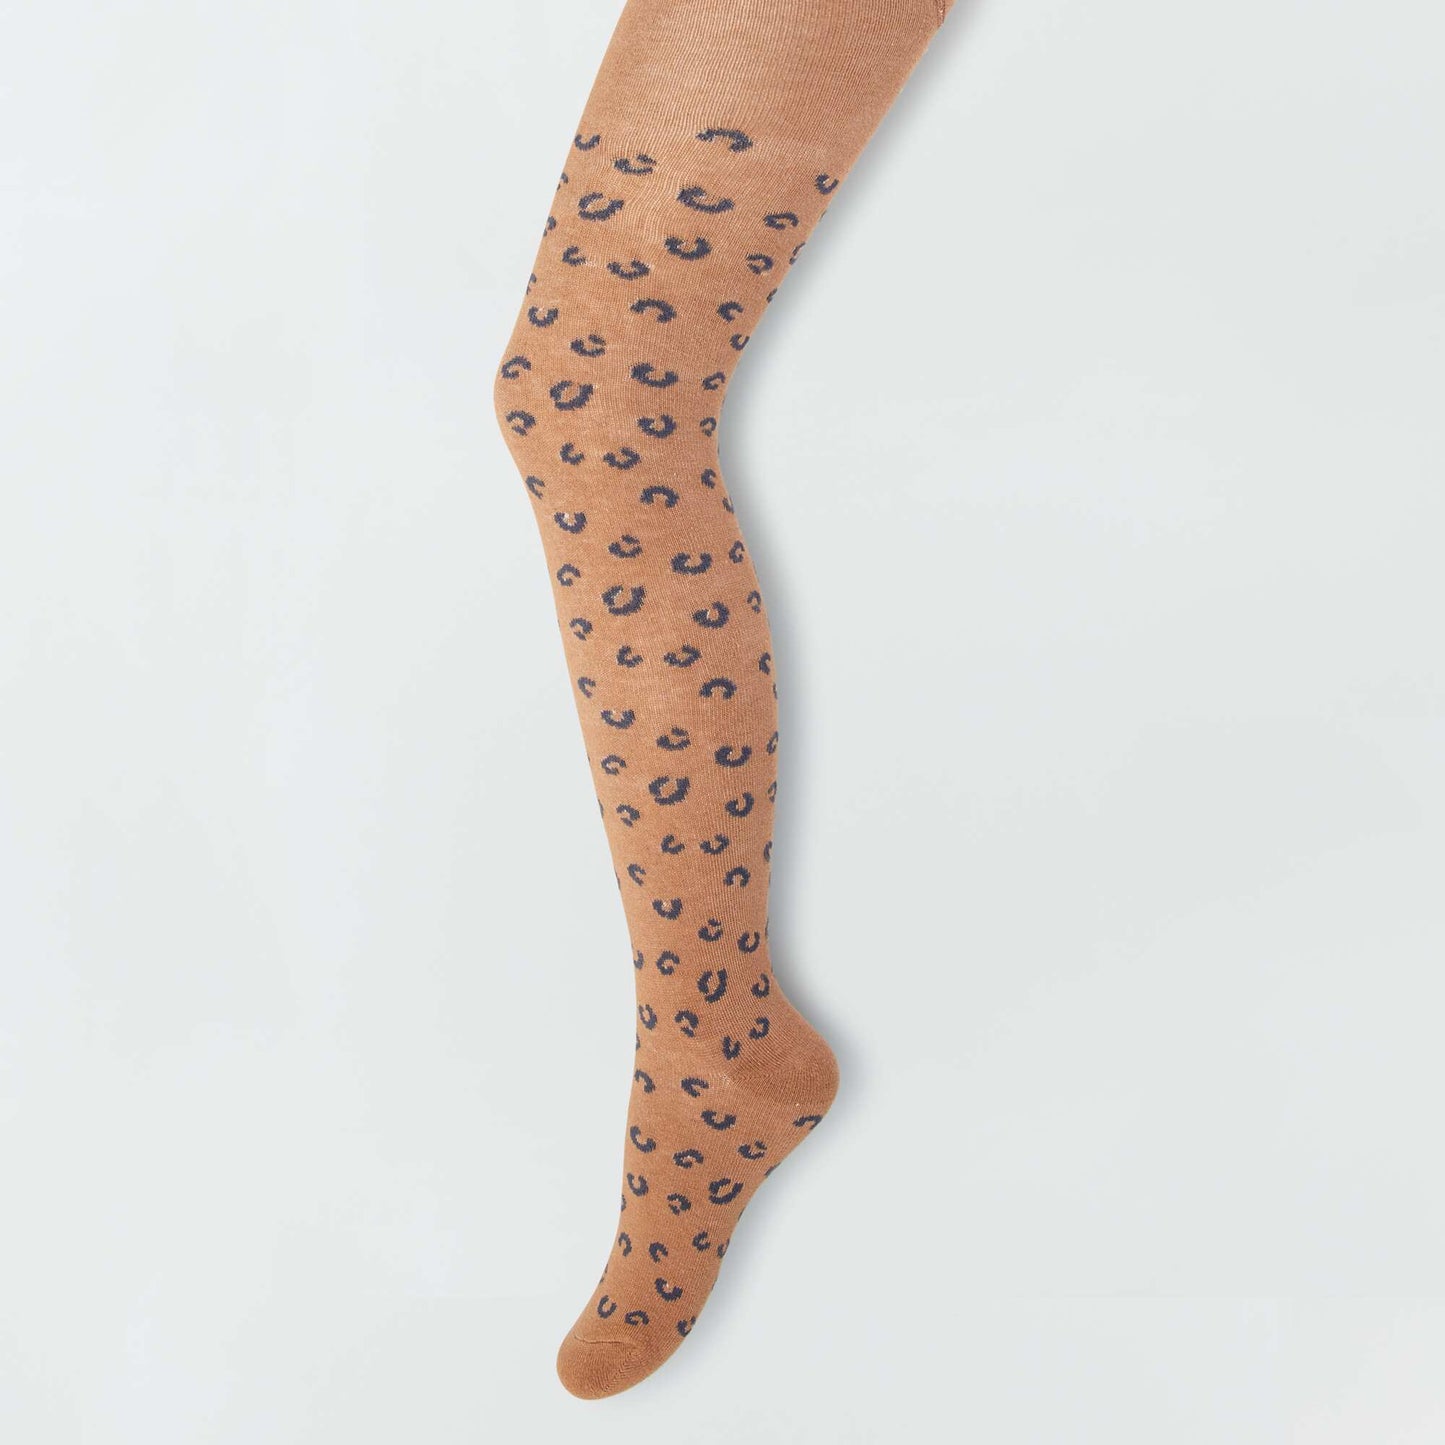 Warm tights with stylish print - Pack of 2 BROWN